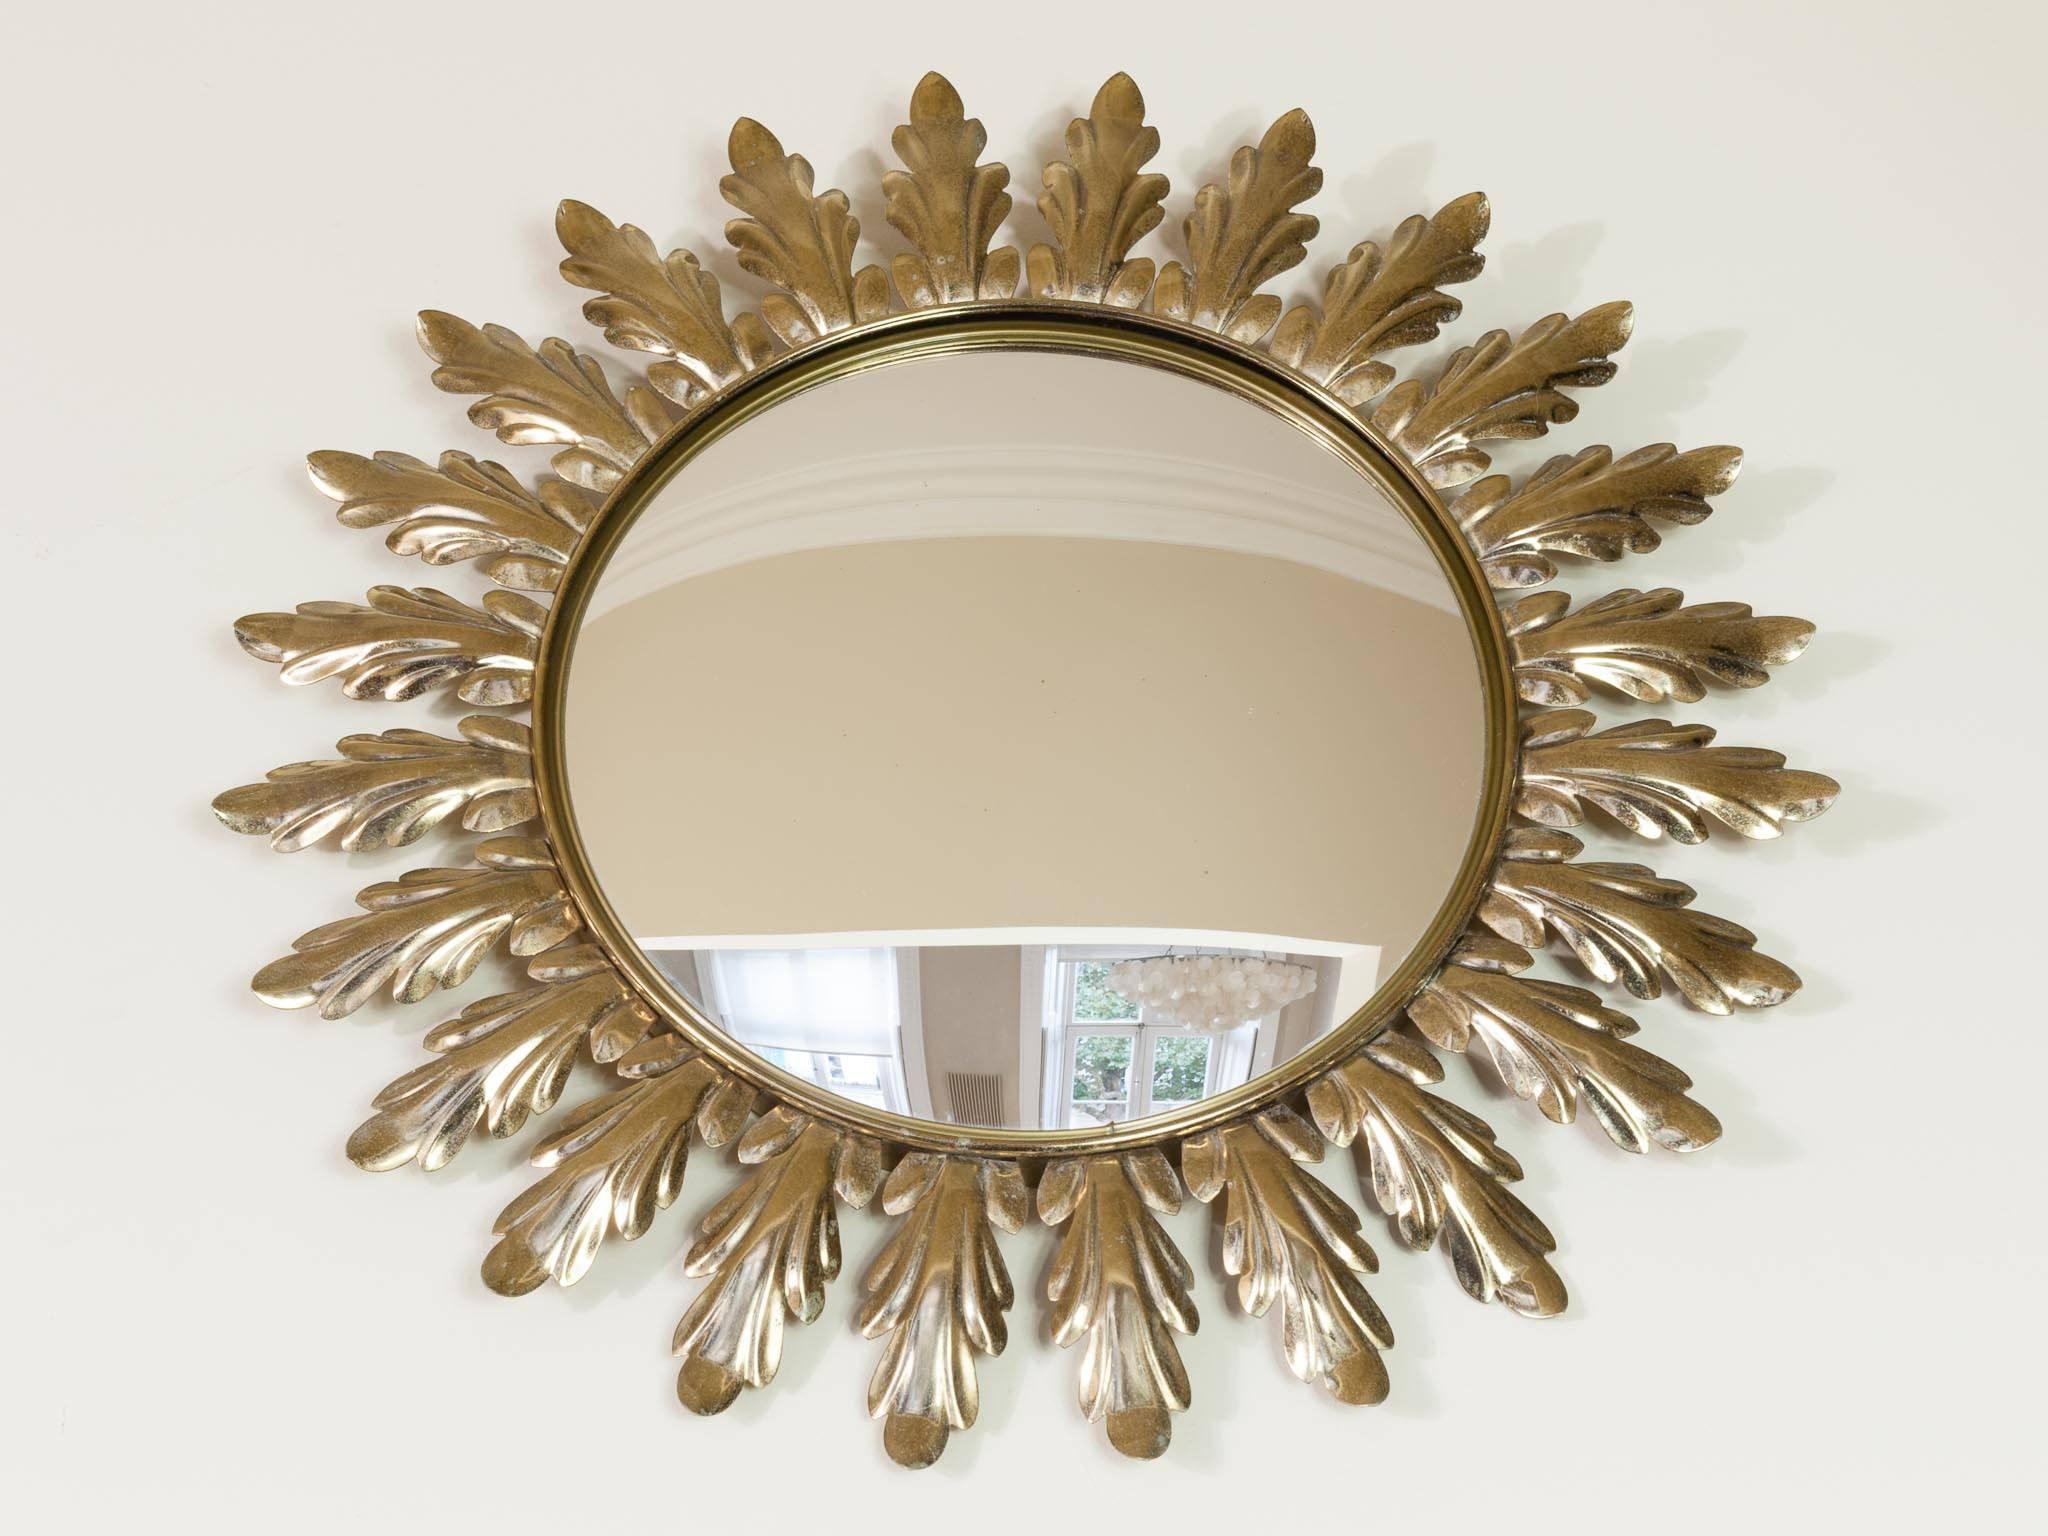 Midcentury stylish 1950s metal stardust convex round mirror with a beautiful gilt patina and in excellent vintage condition. A striking and Classic vintage design piece.

Mirror diameter: 30cms.